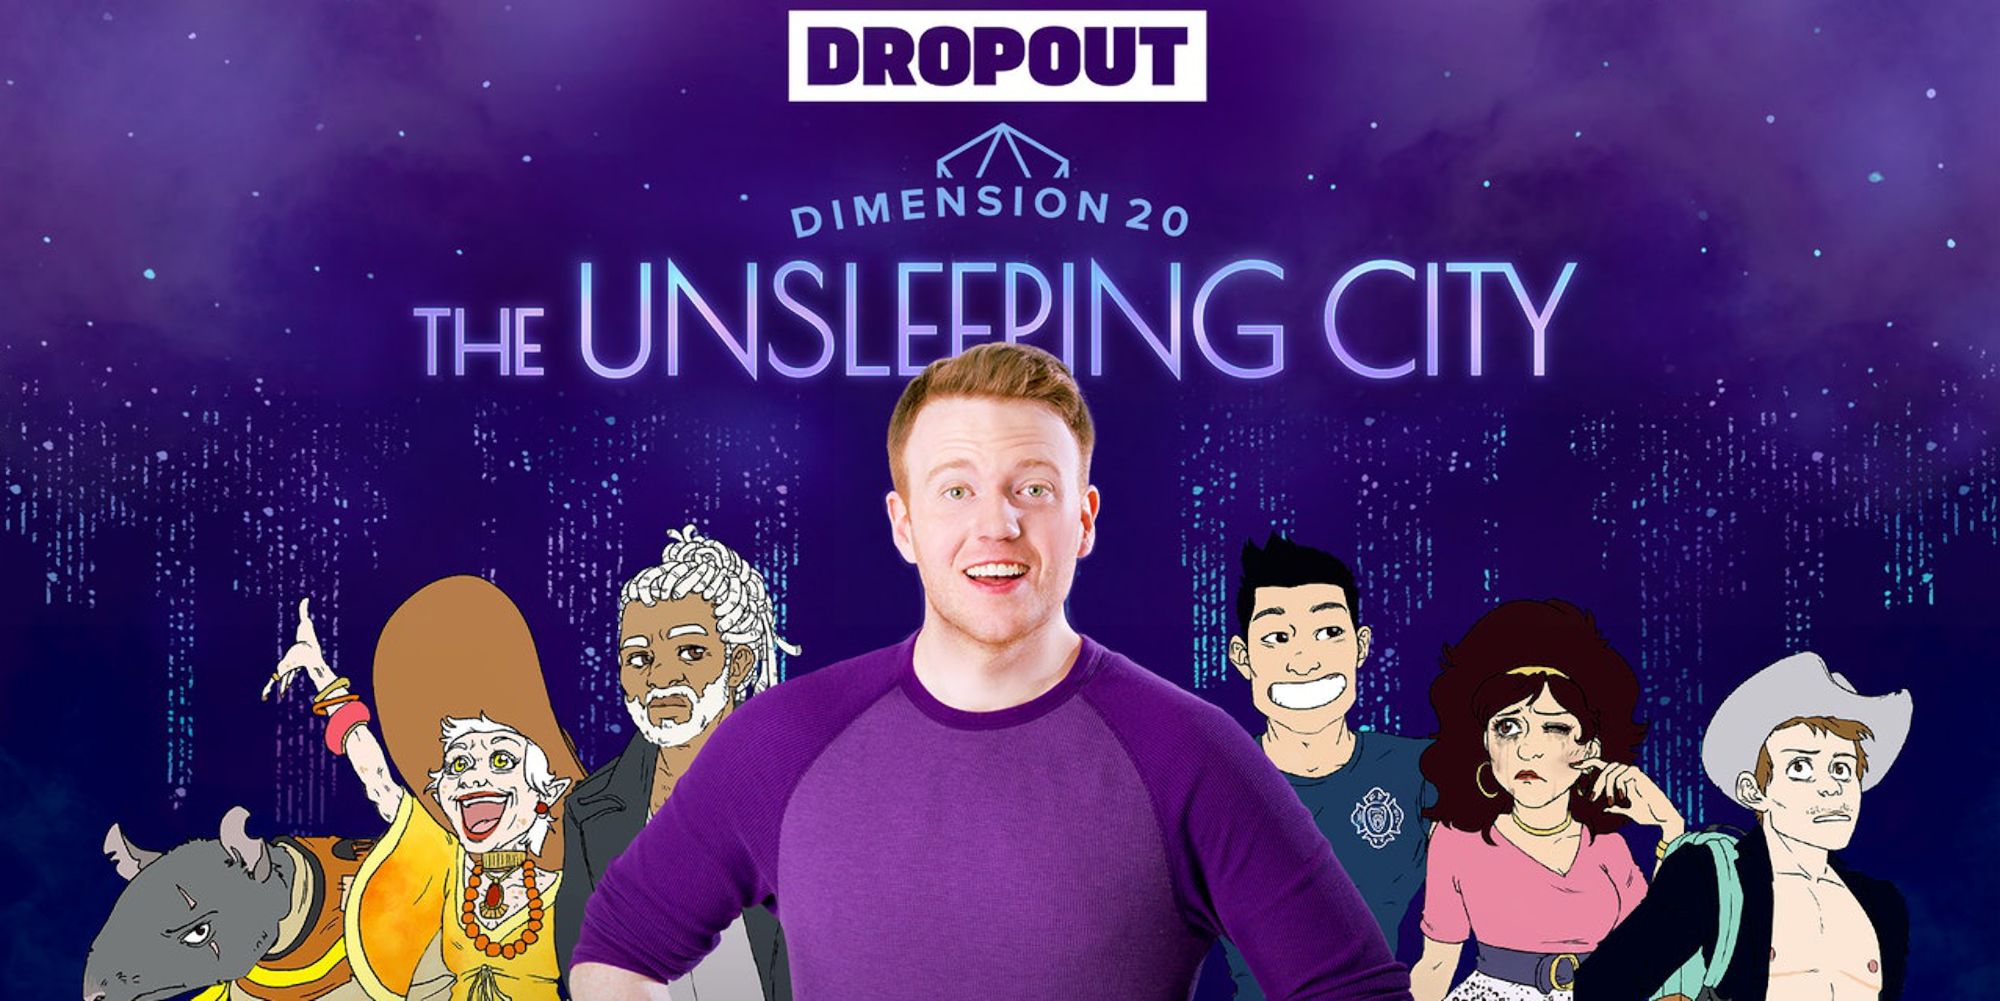 The cast and DM of The Unsleeping City.